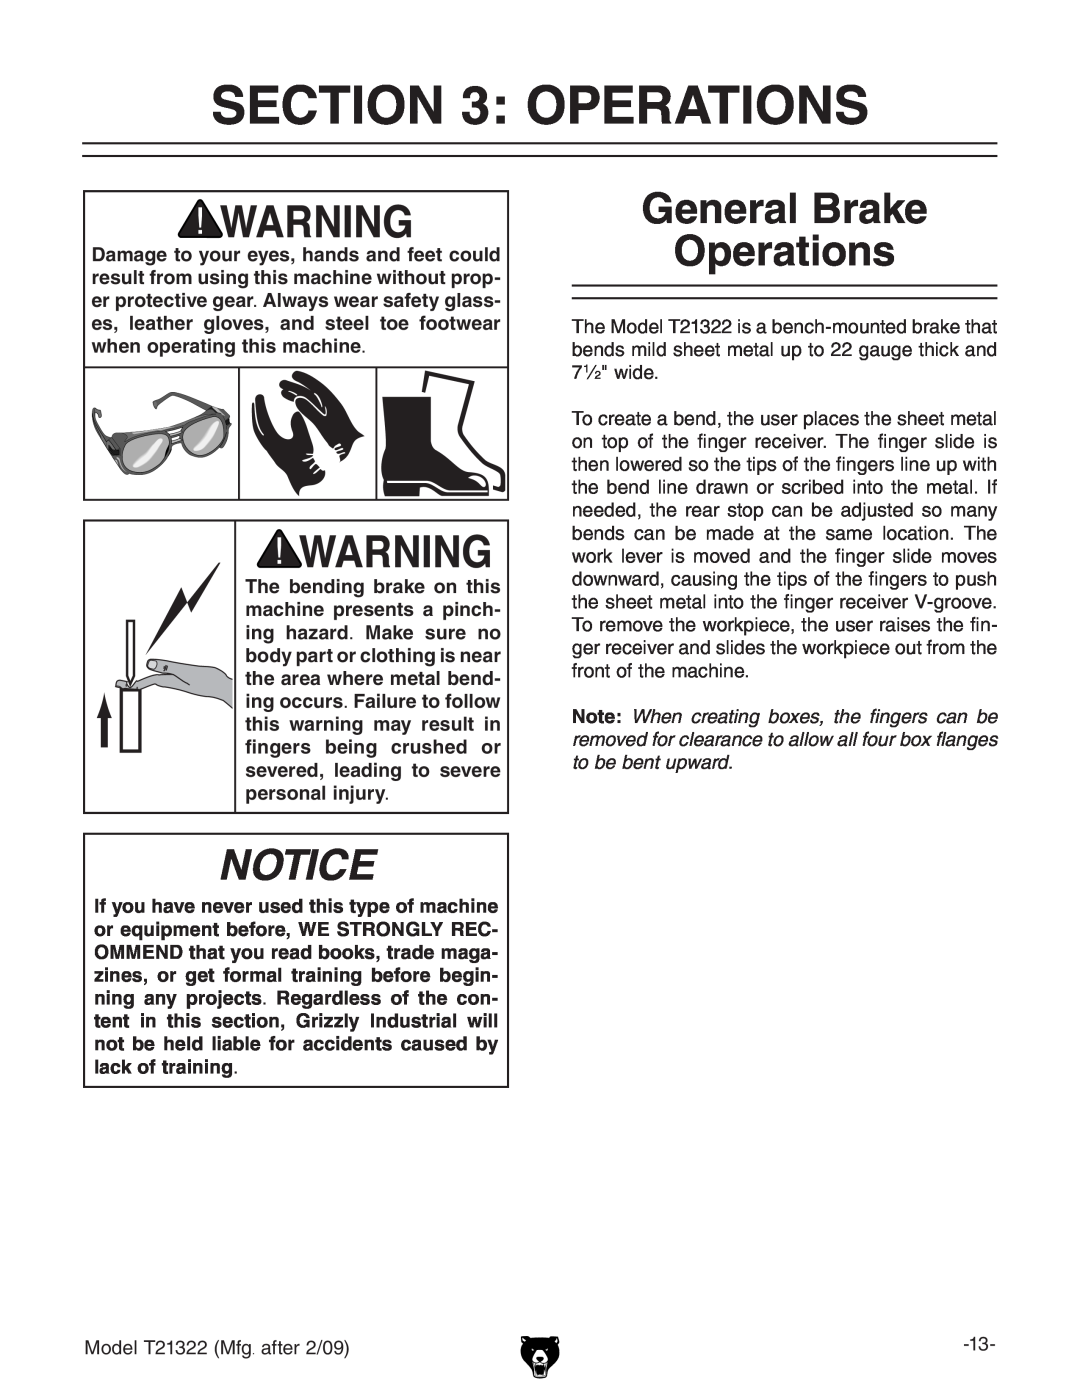 Grizzly T21322 owner manual General Brake Operations 